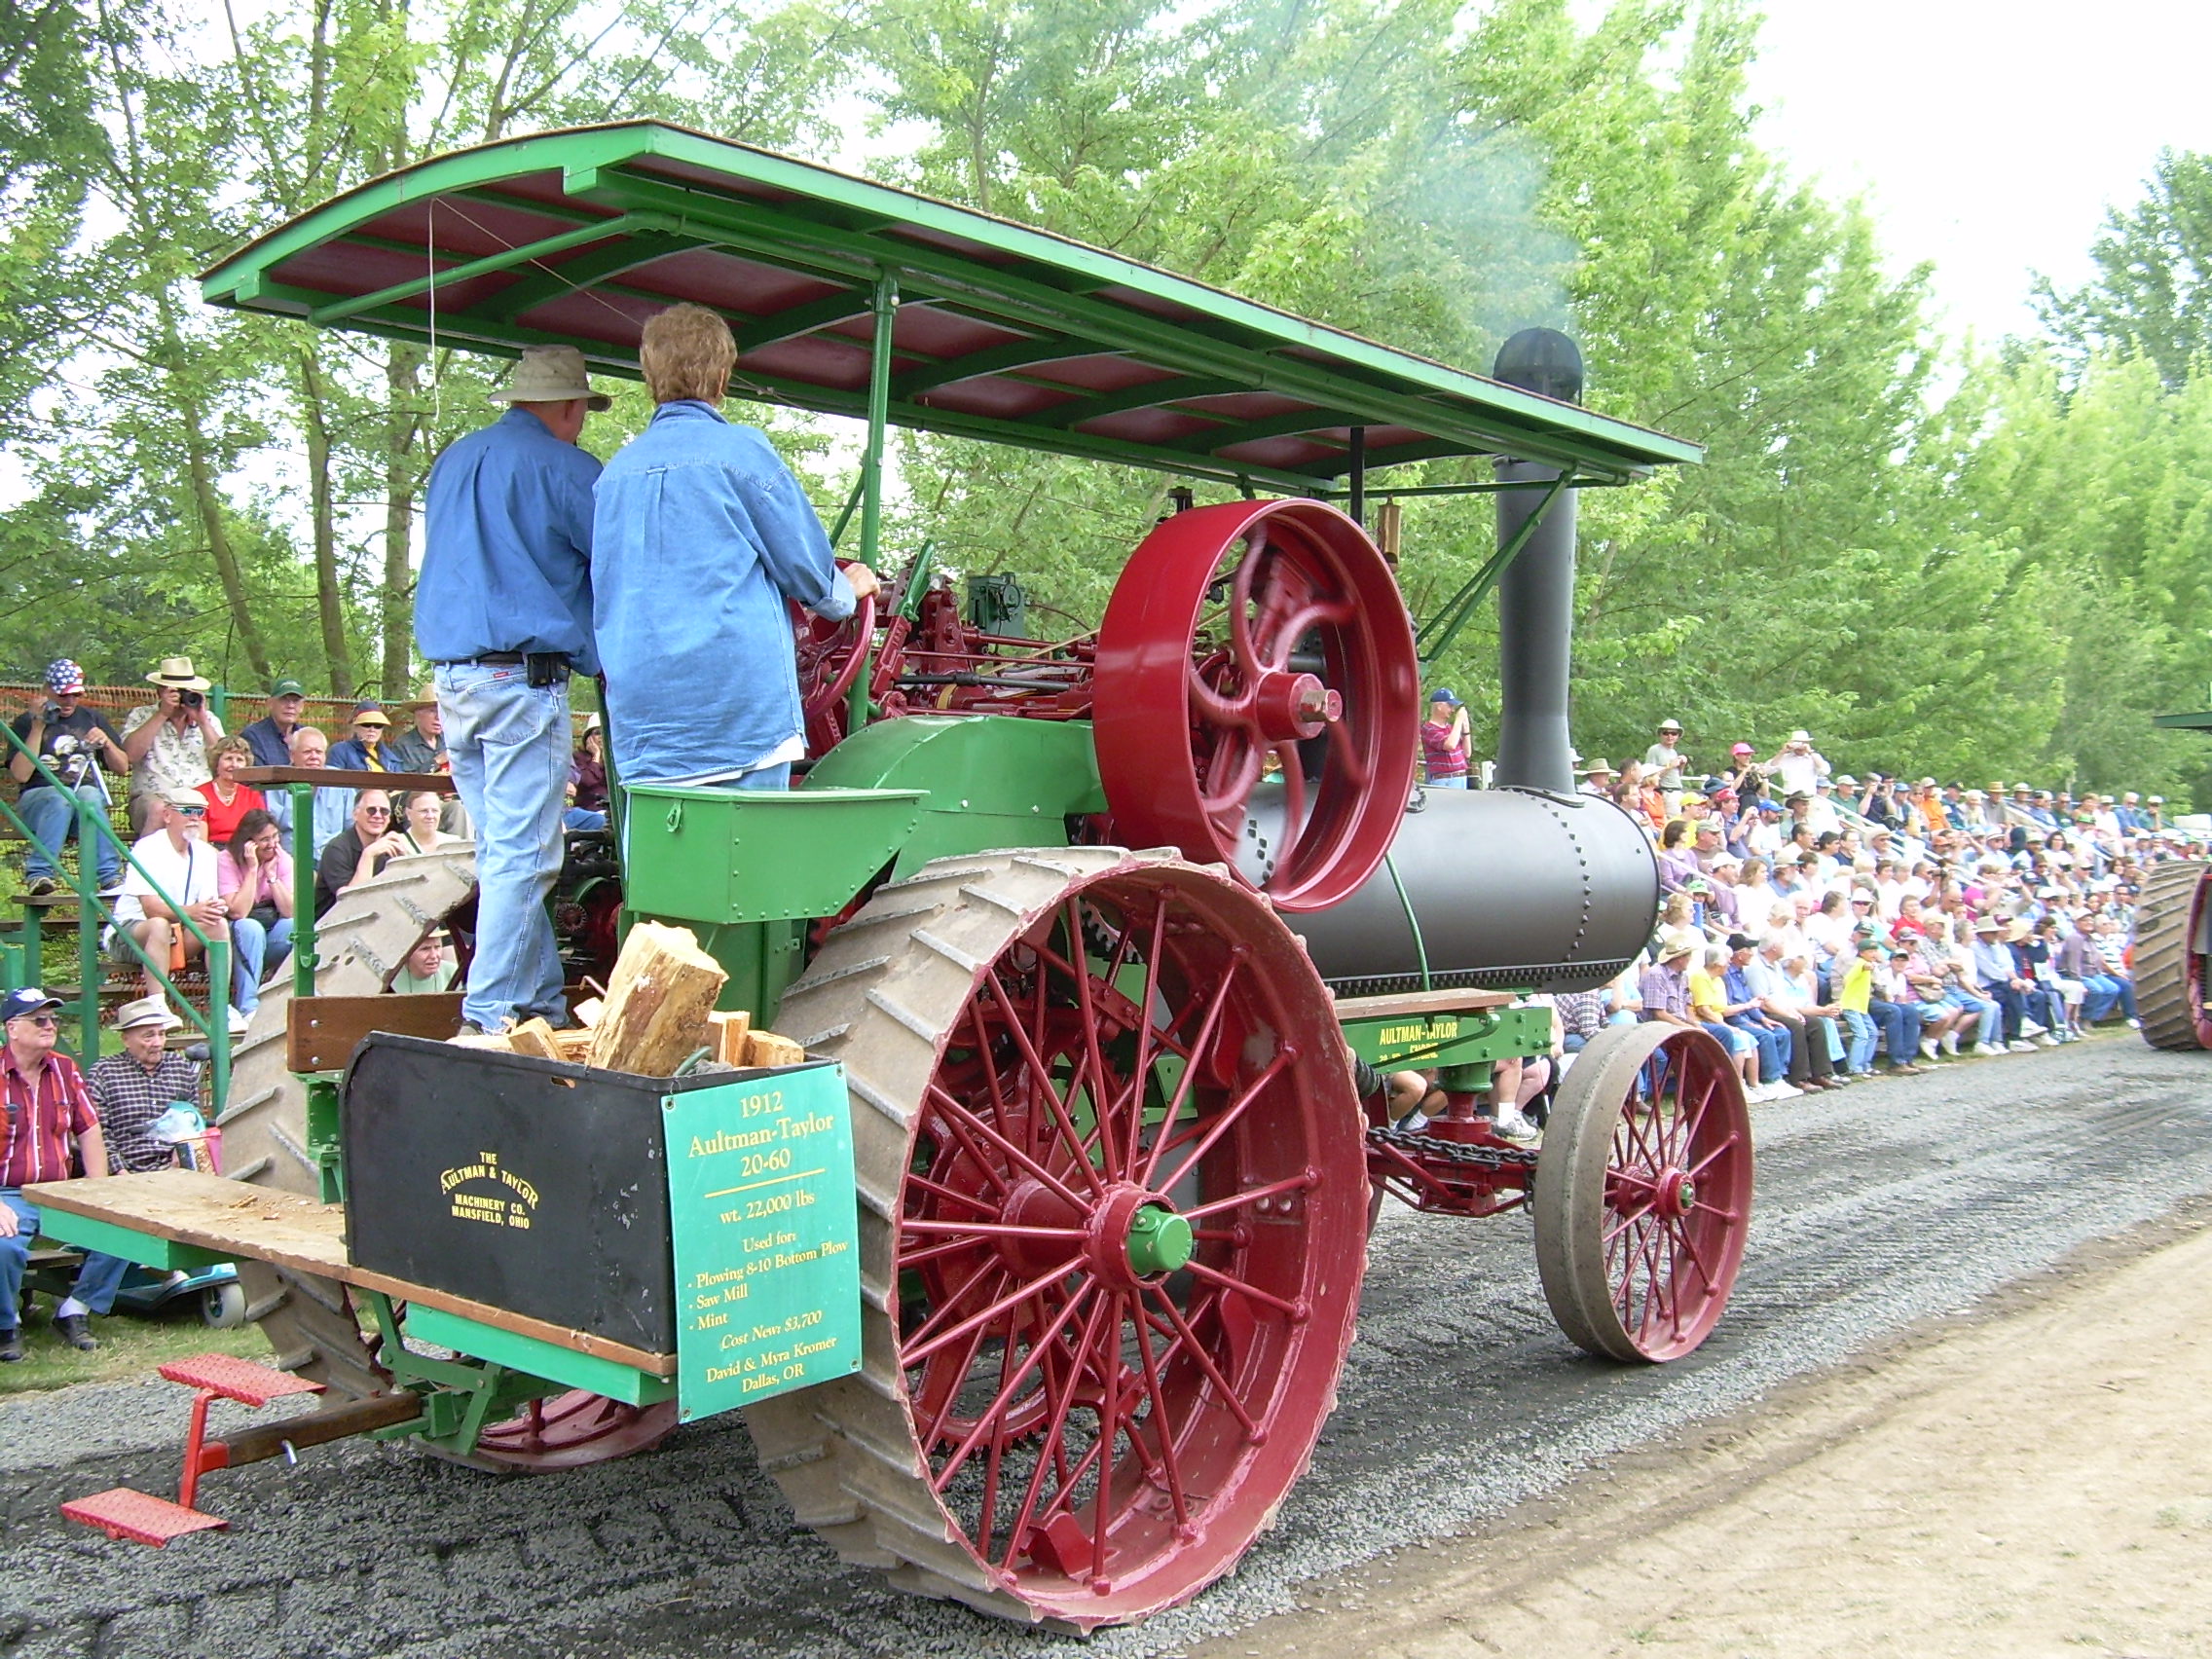 two people riding old steam engine as crowd looks on